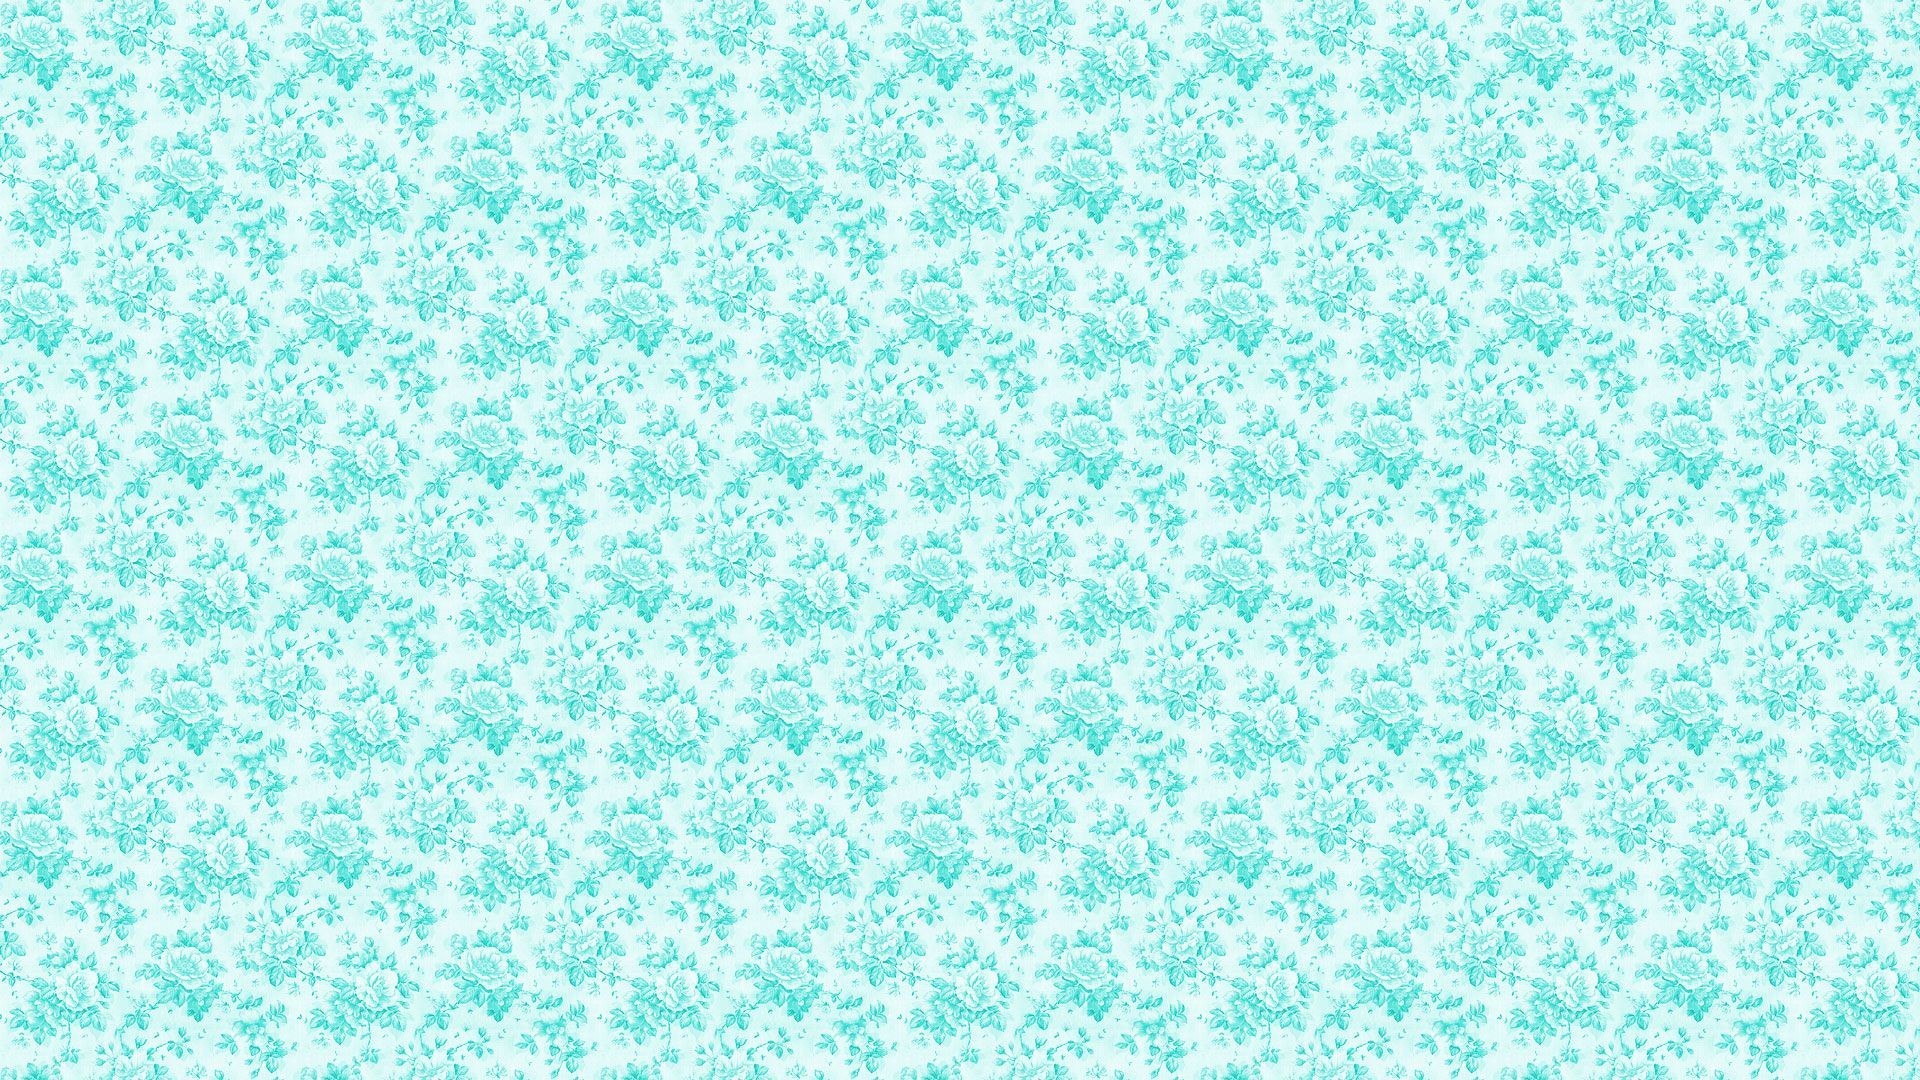 Cute Green Background Wallpaper HD With Resolution 1920X1080 pixel. You can make this wallpaper for your Desktop Computer Backgrounds, Mac Wallpapers, Android Lock screen or iPhone Screensavers